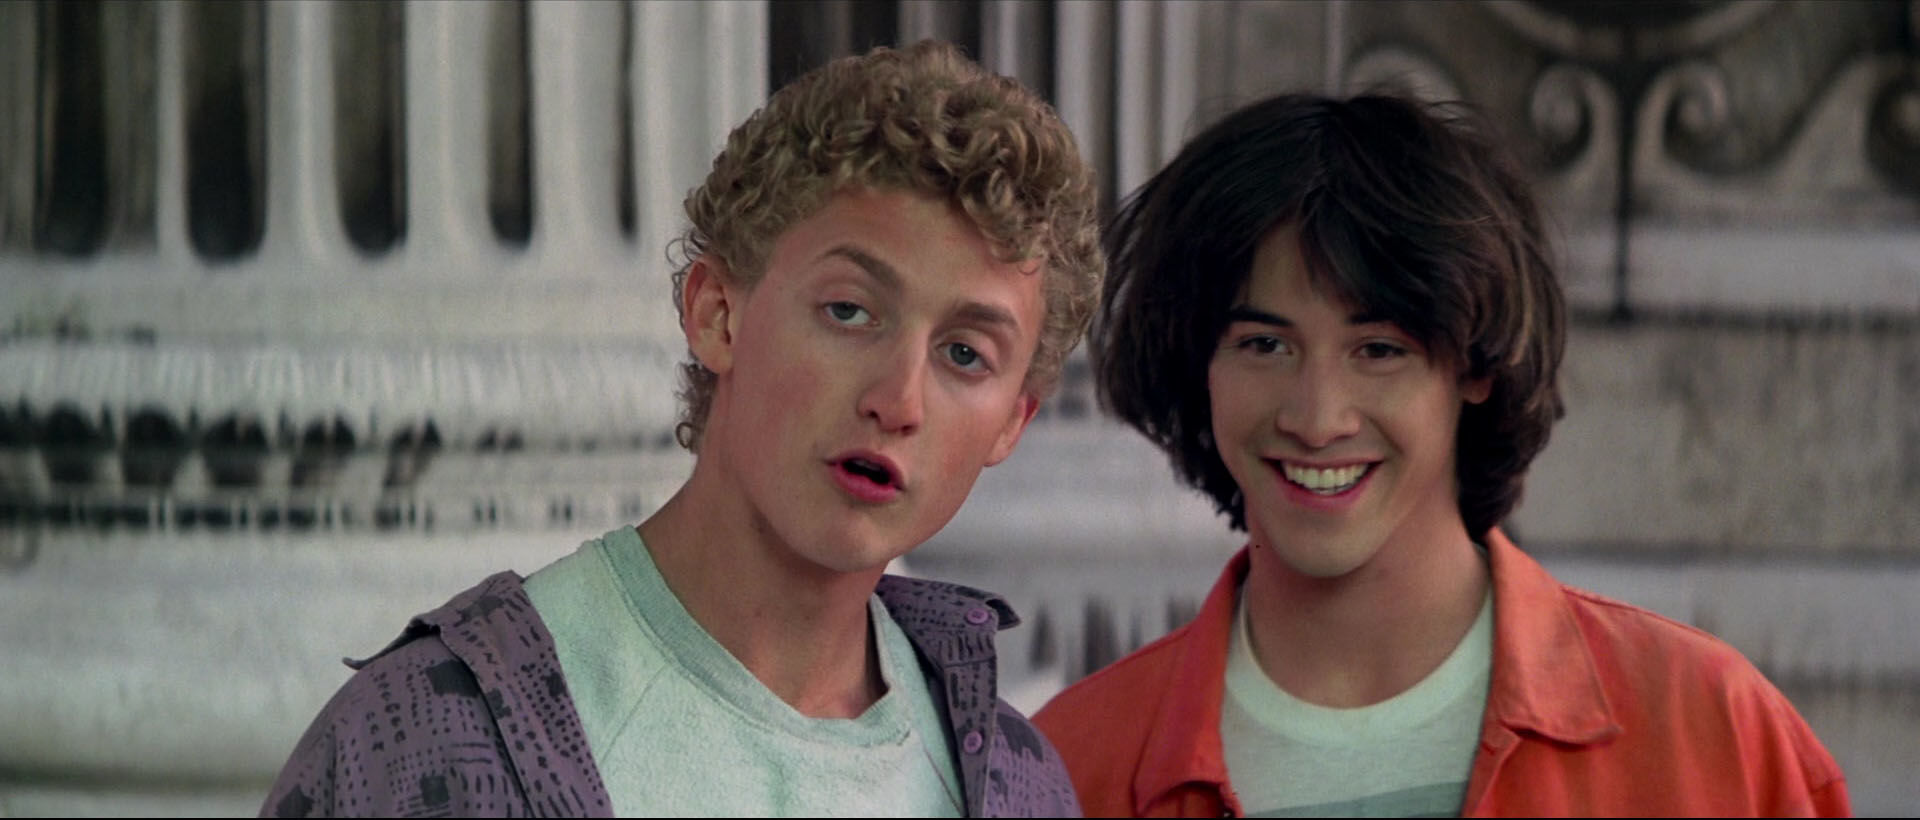 bill and ted socrates smile